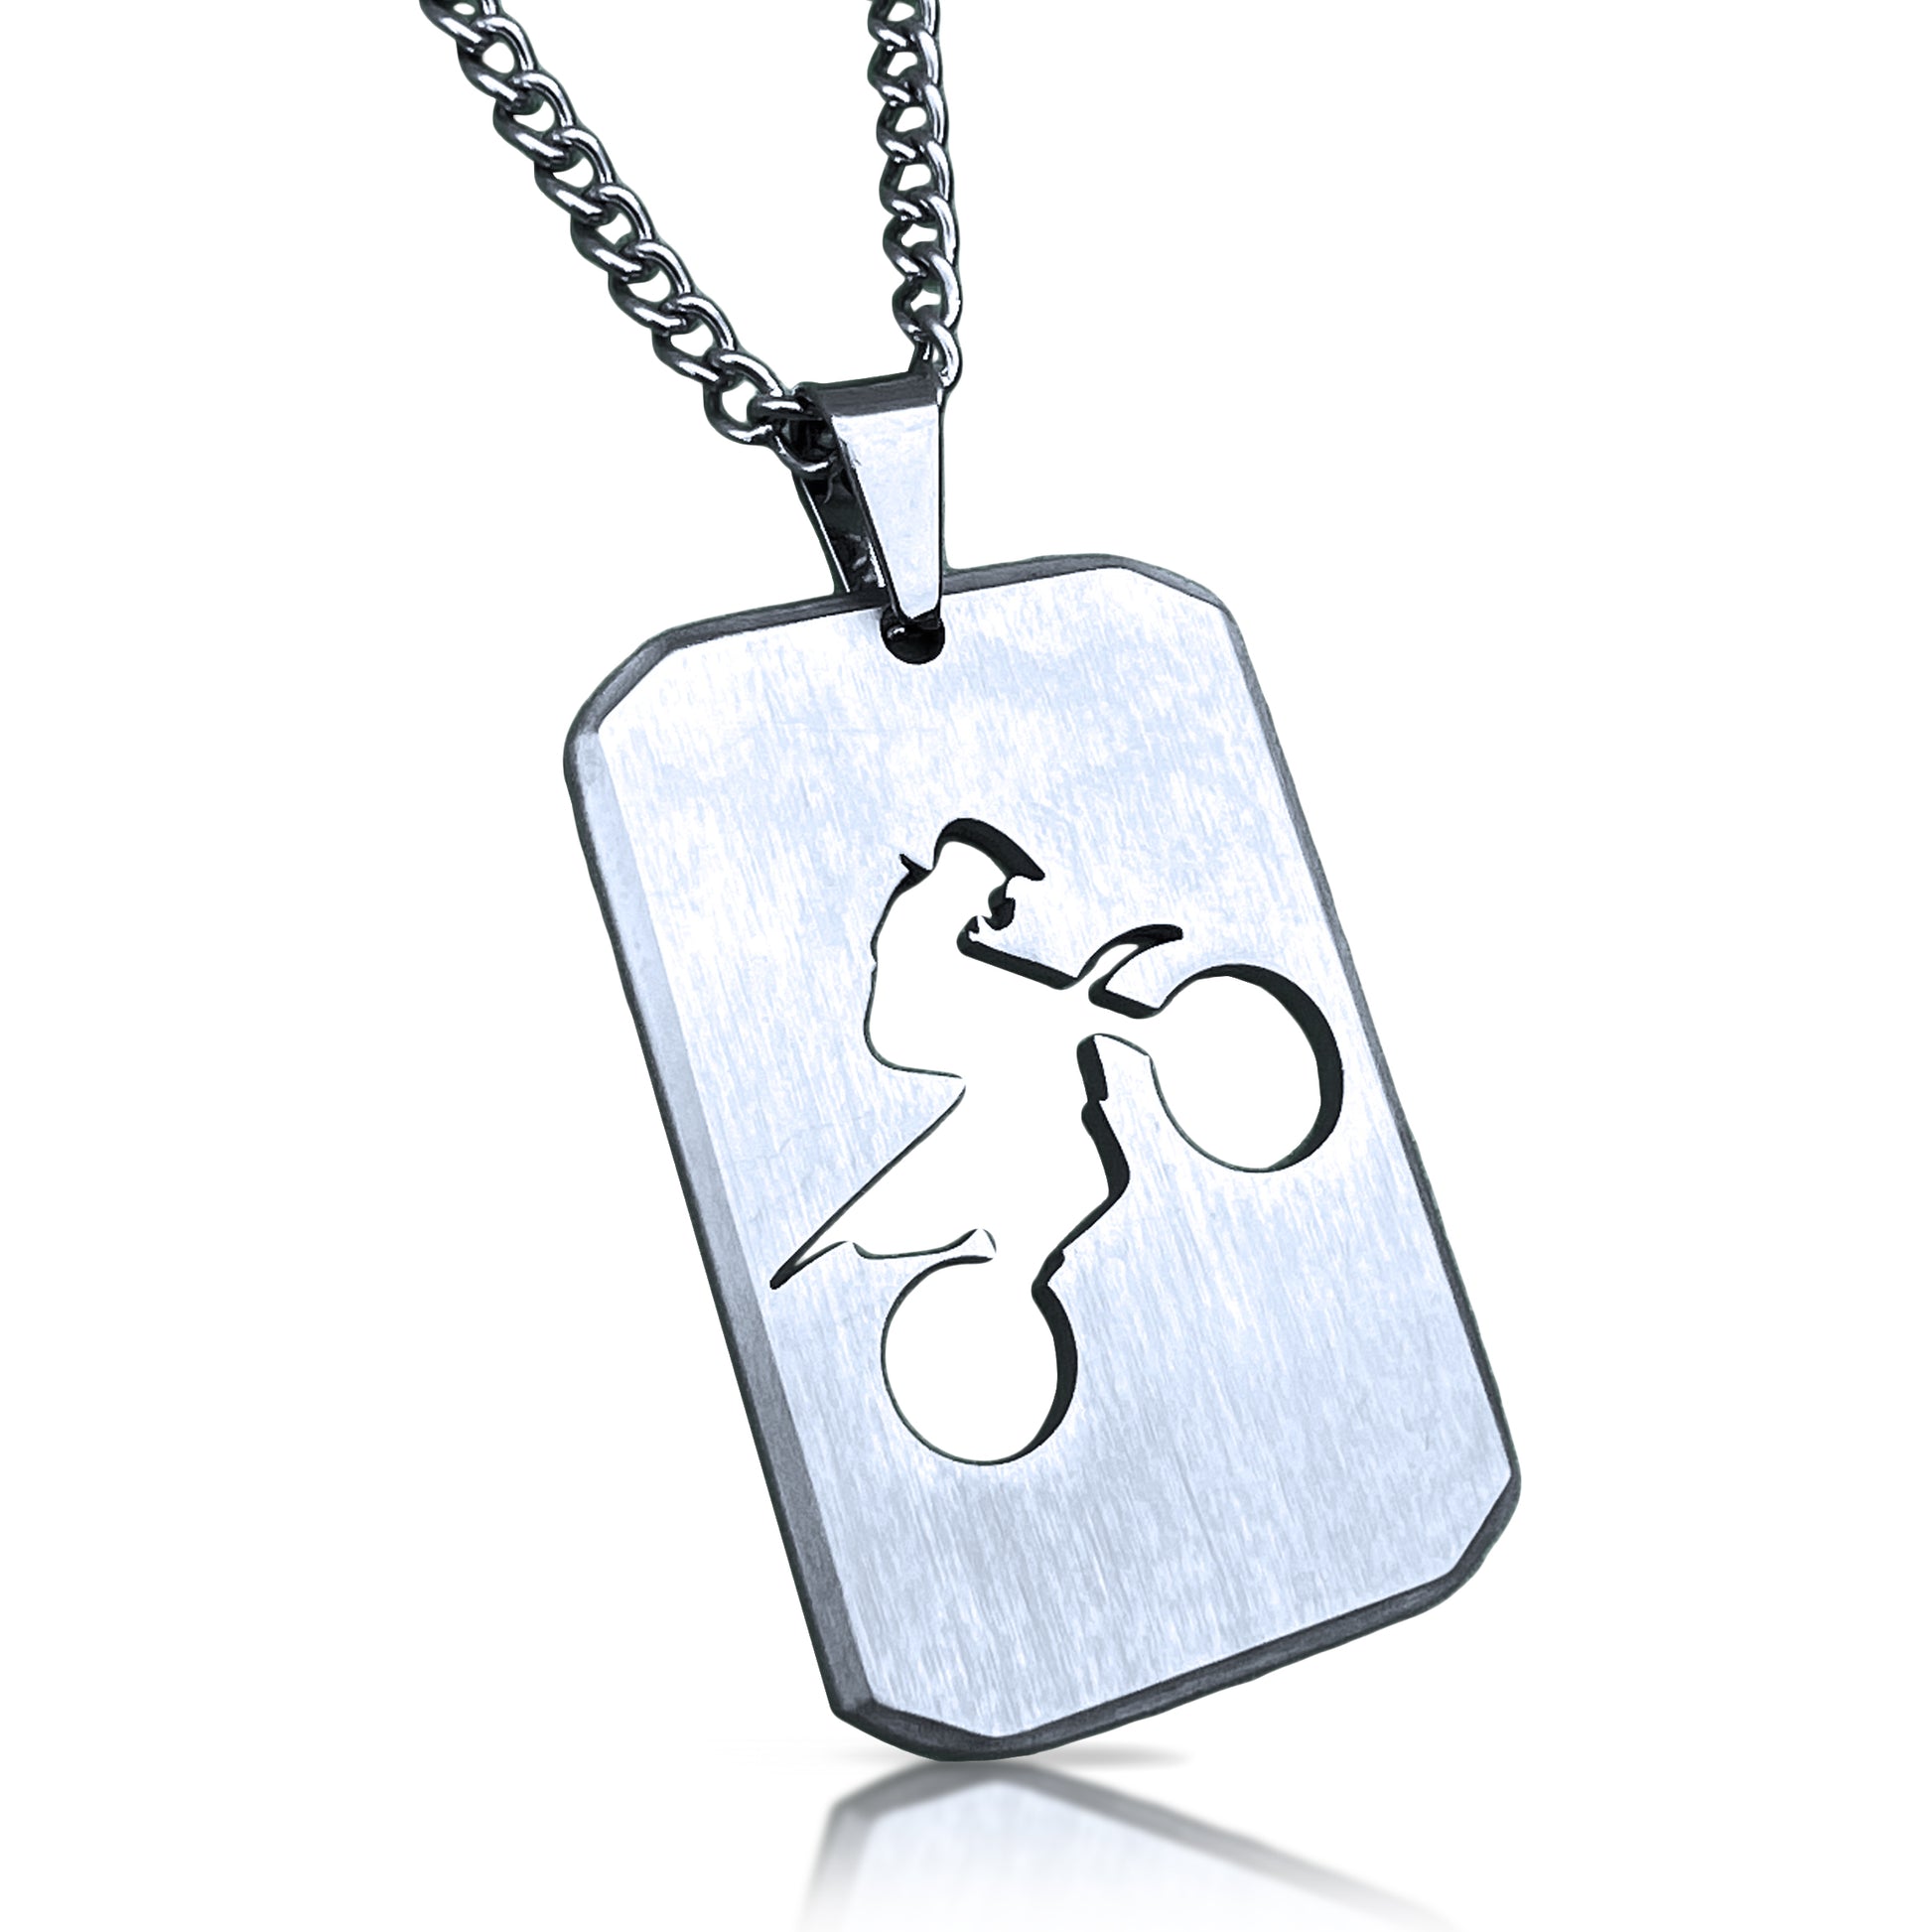 Motocross Cut Out Pendant With Chain Necklace - Stainless Steel